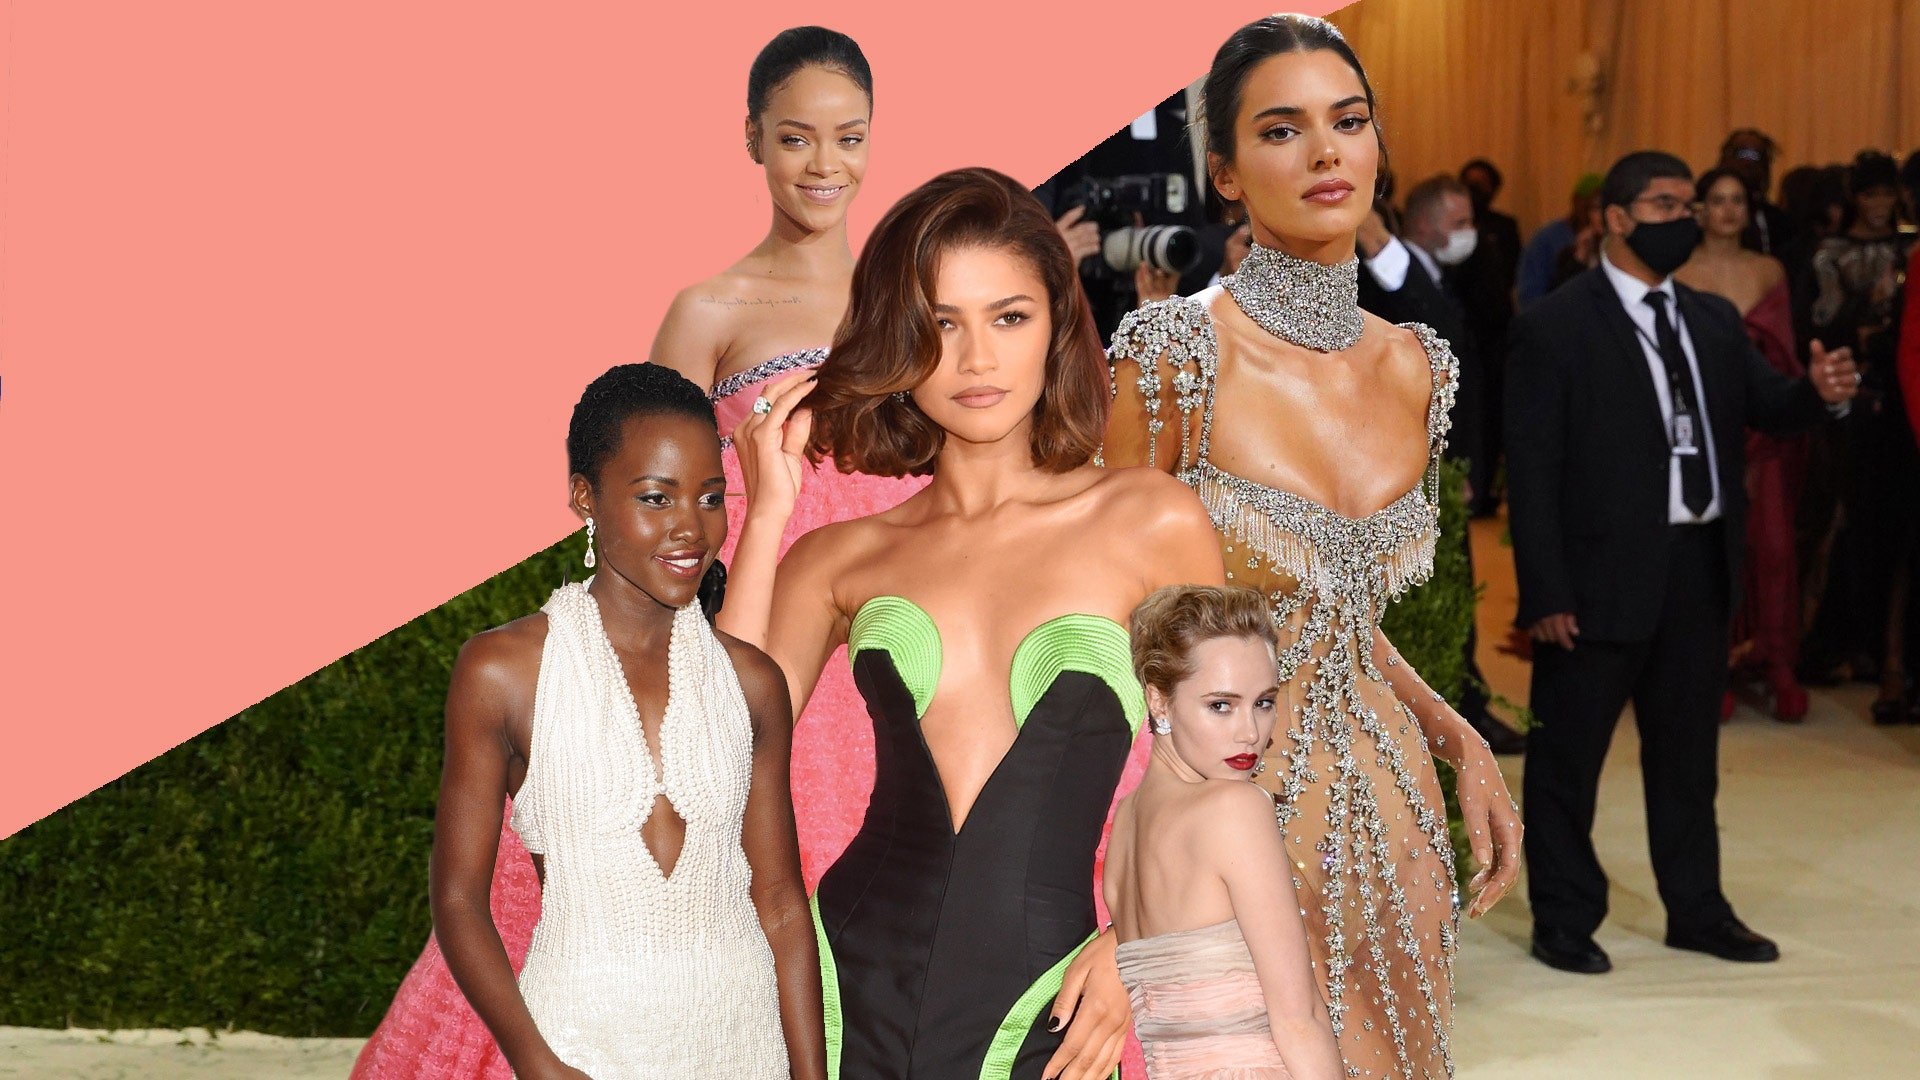 The most major red carpet dresses of all time